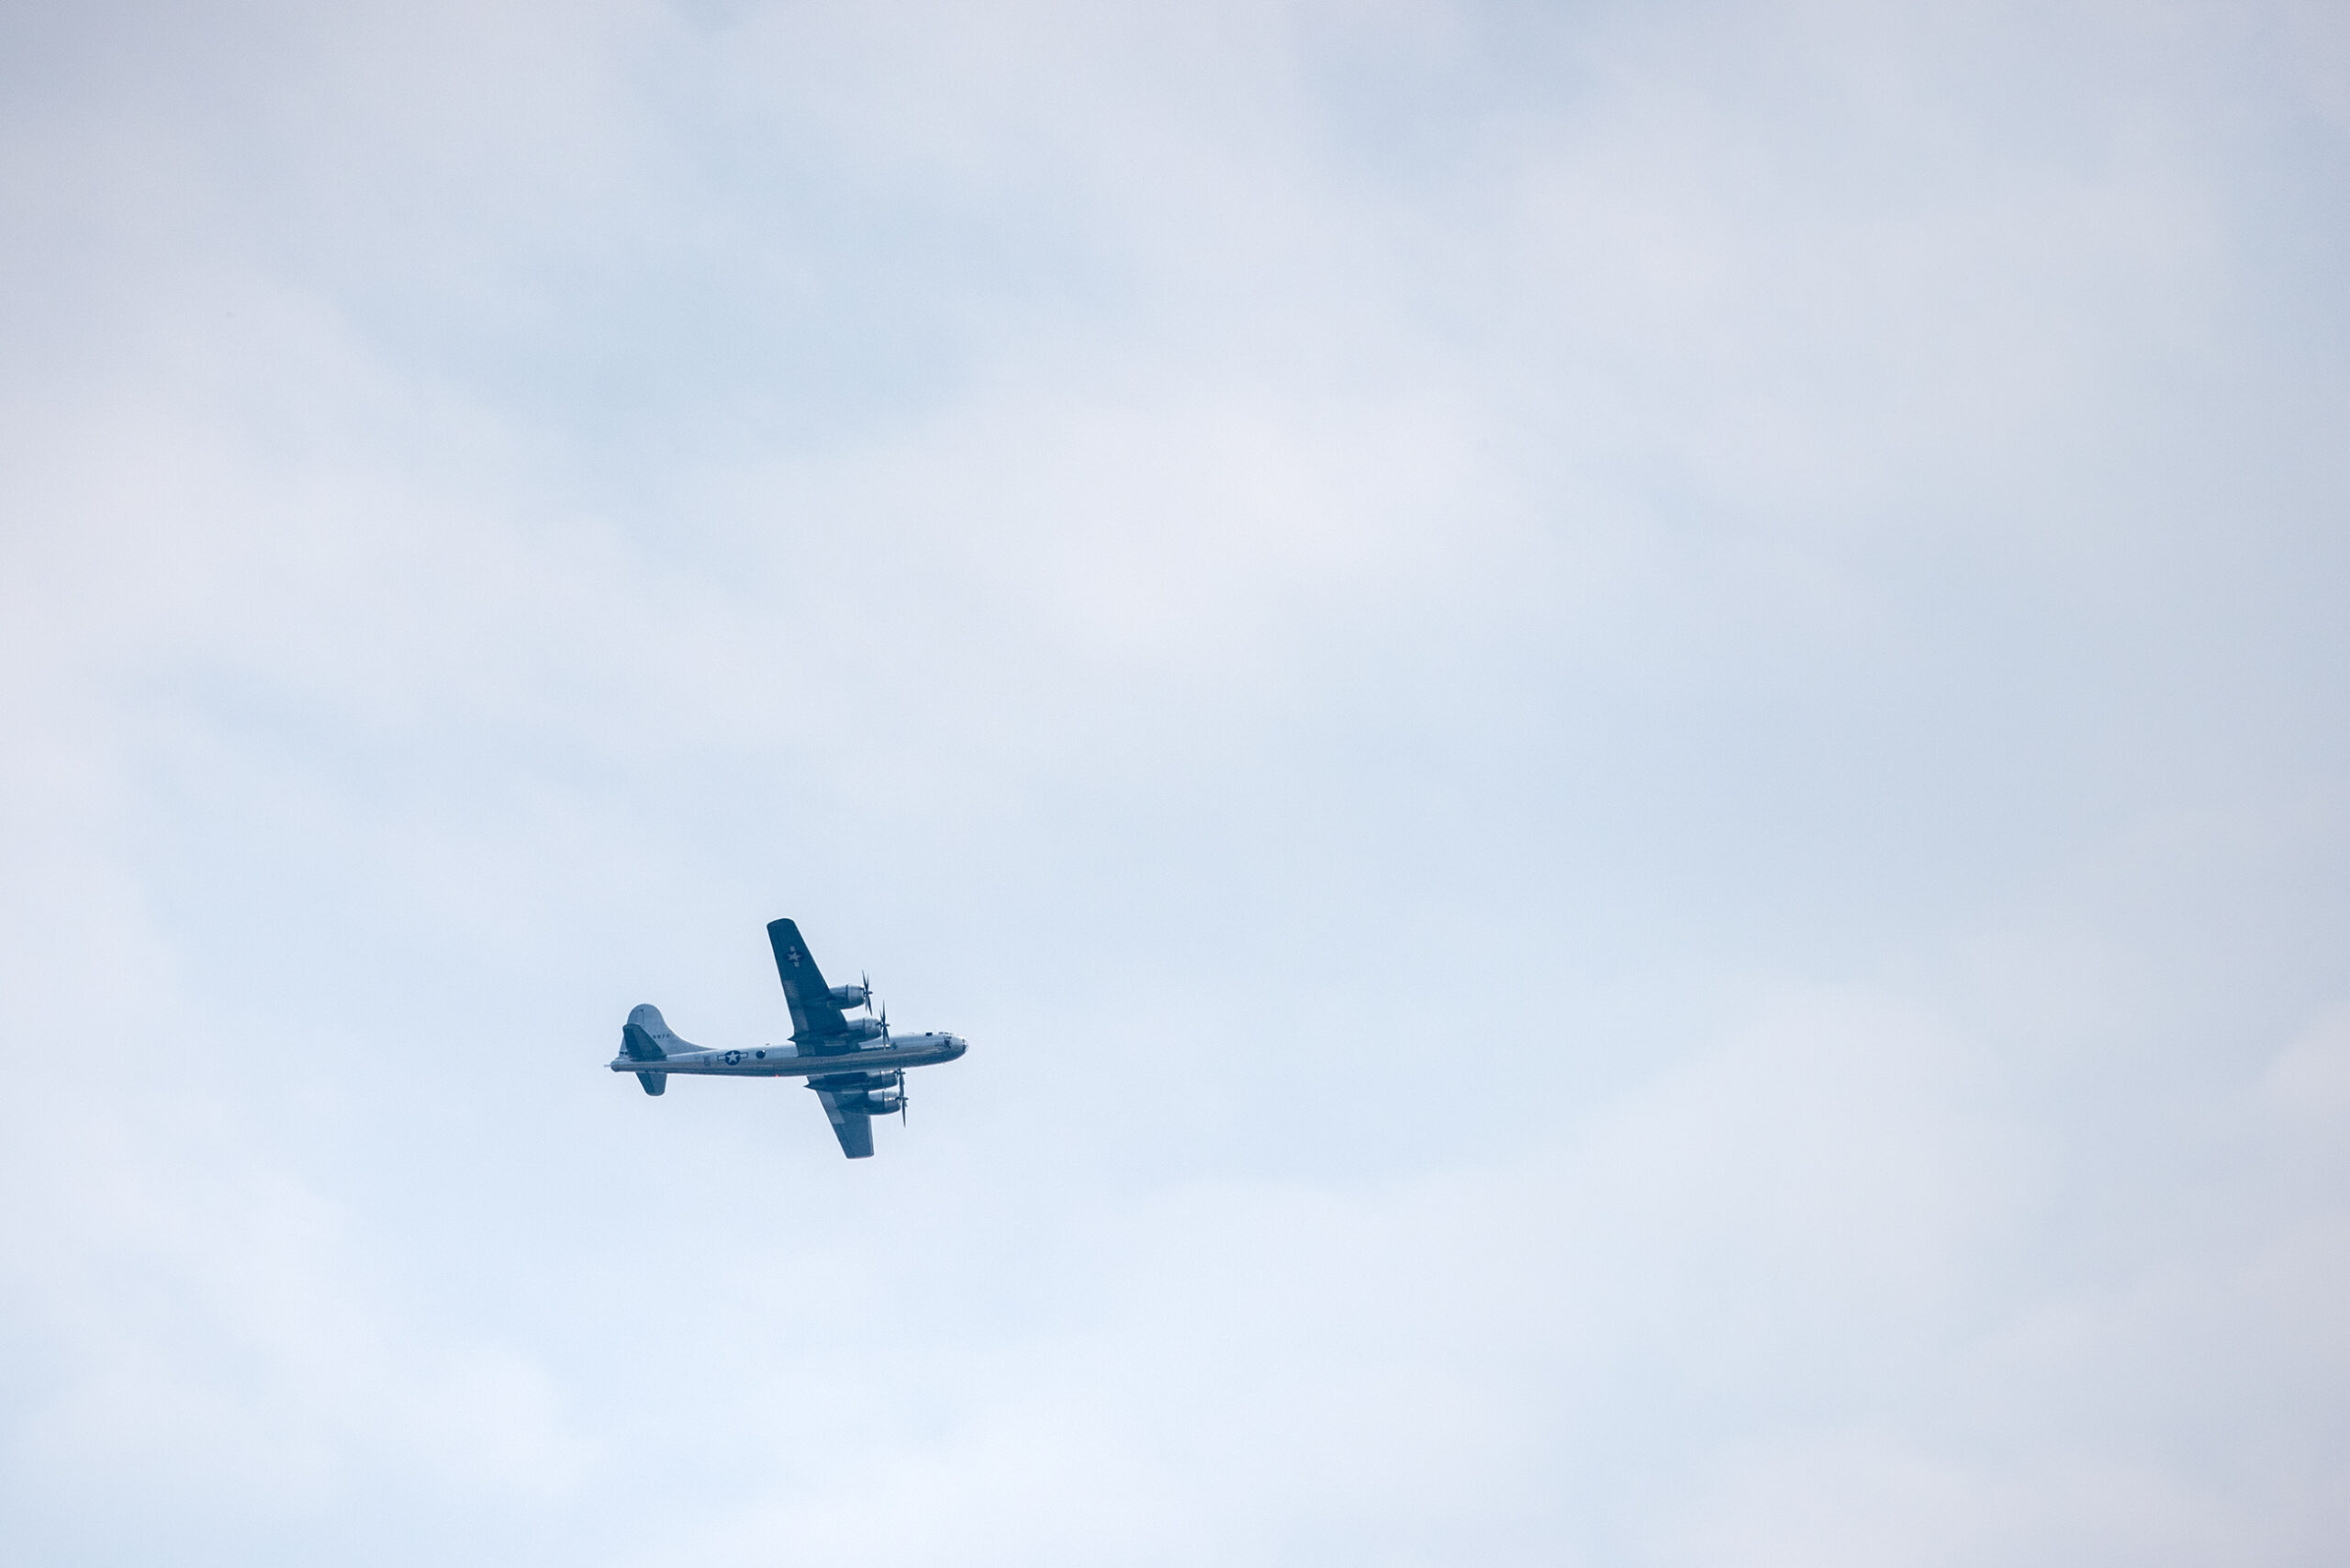 A large military airplane flies in the air.